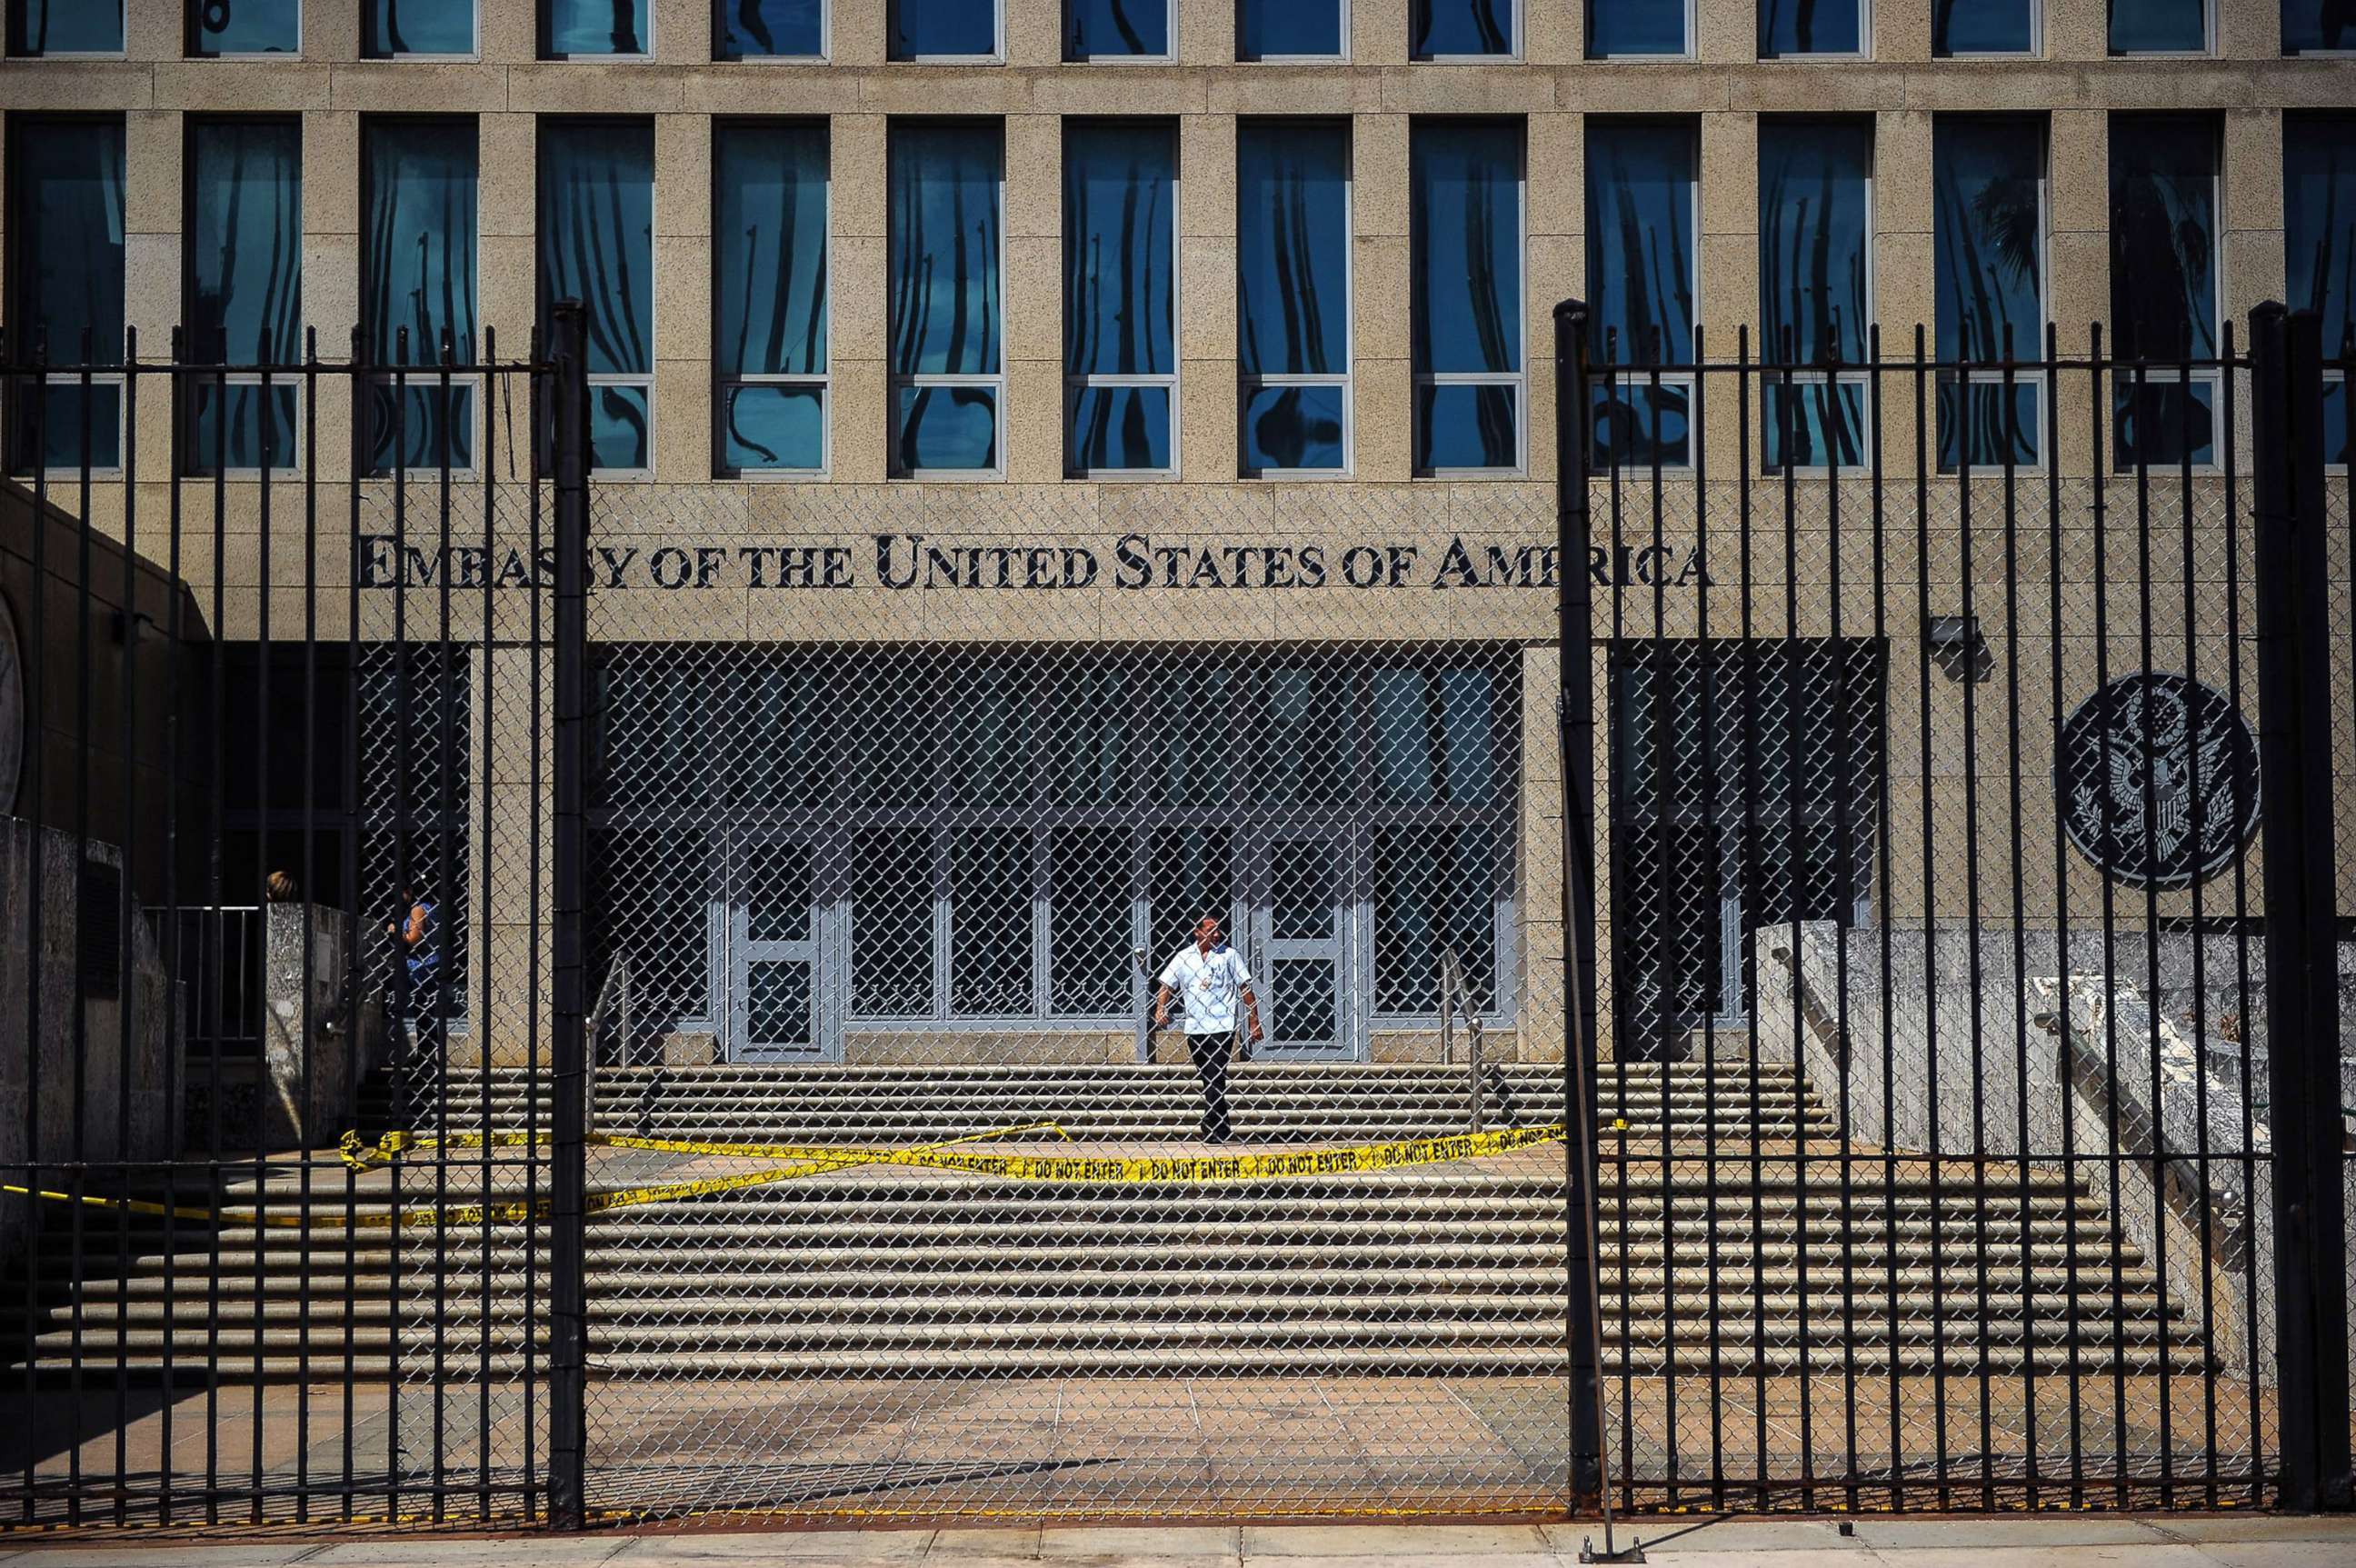 PHOTO: The gate in front of the U.S. embassy in Havana.